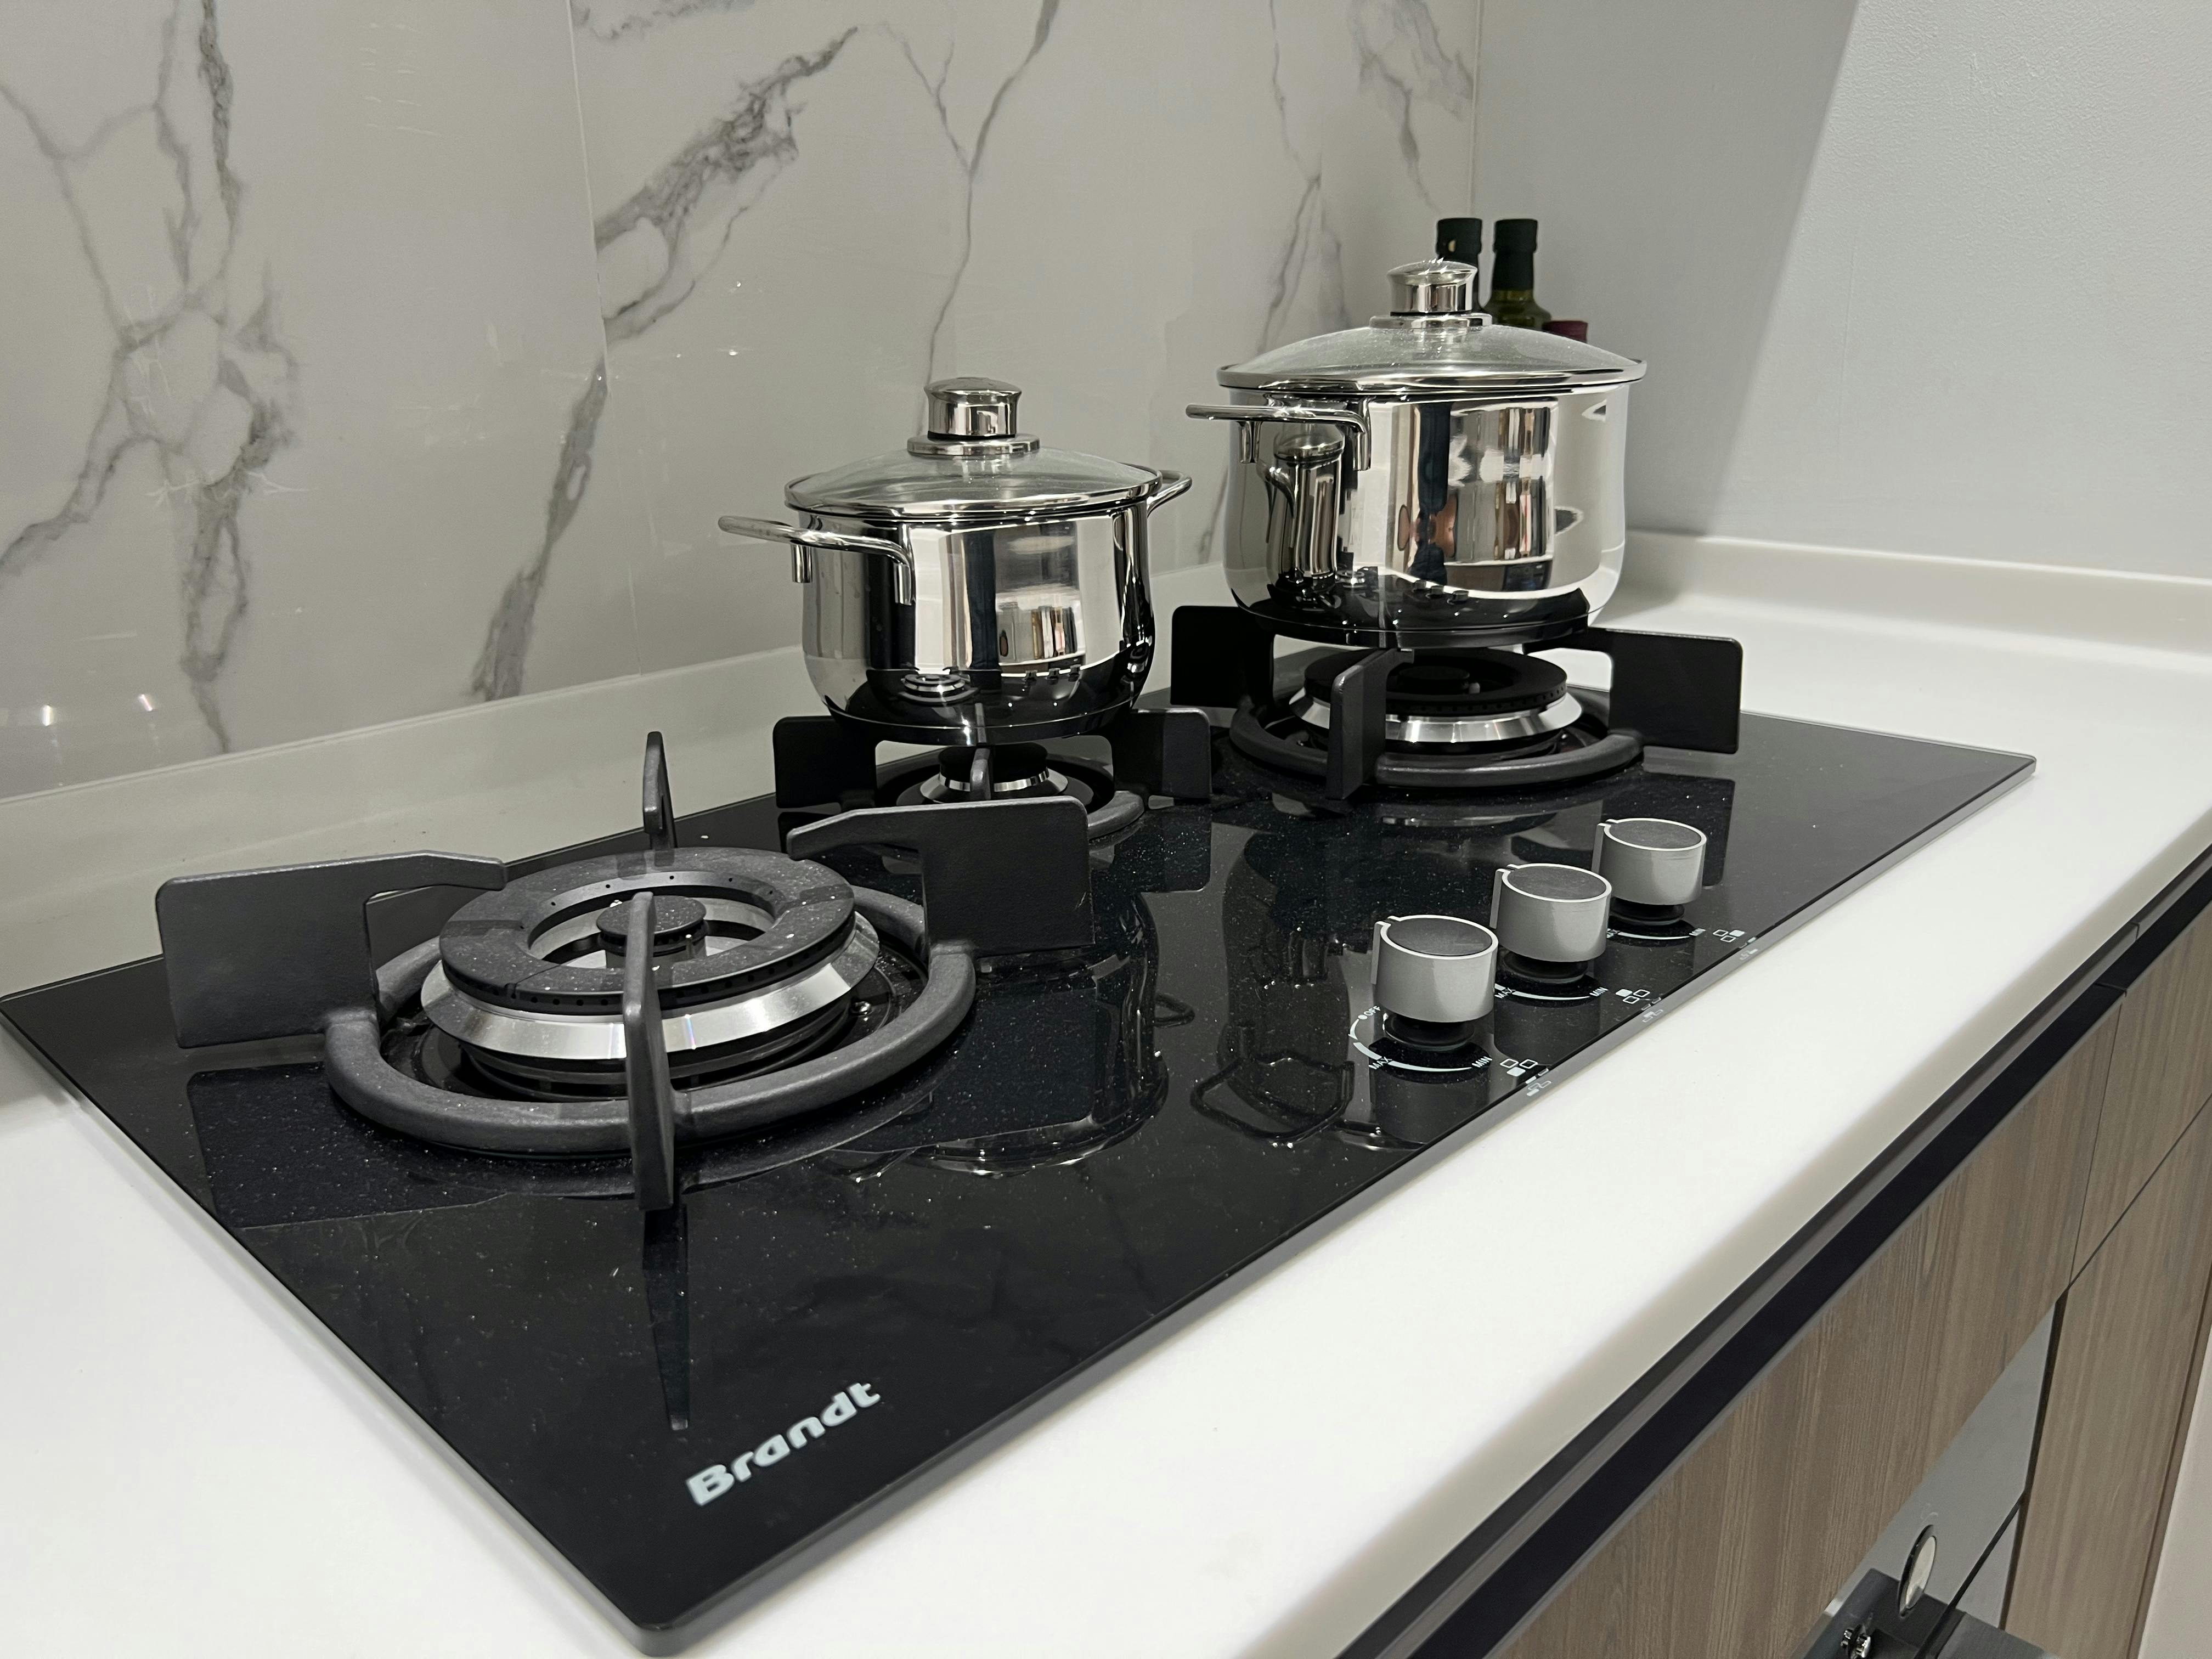 north gaia brandt gas hob and cooker